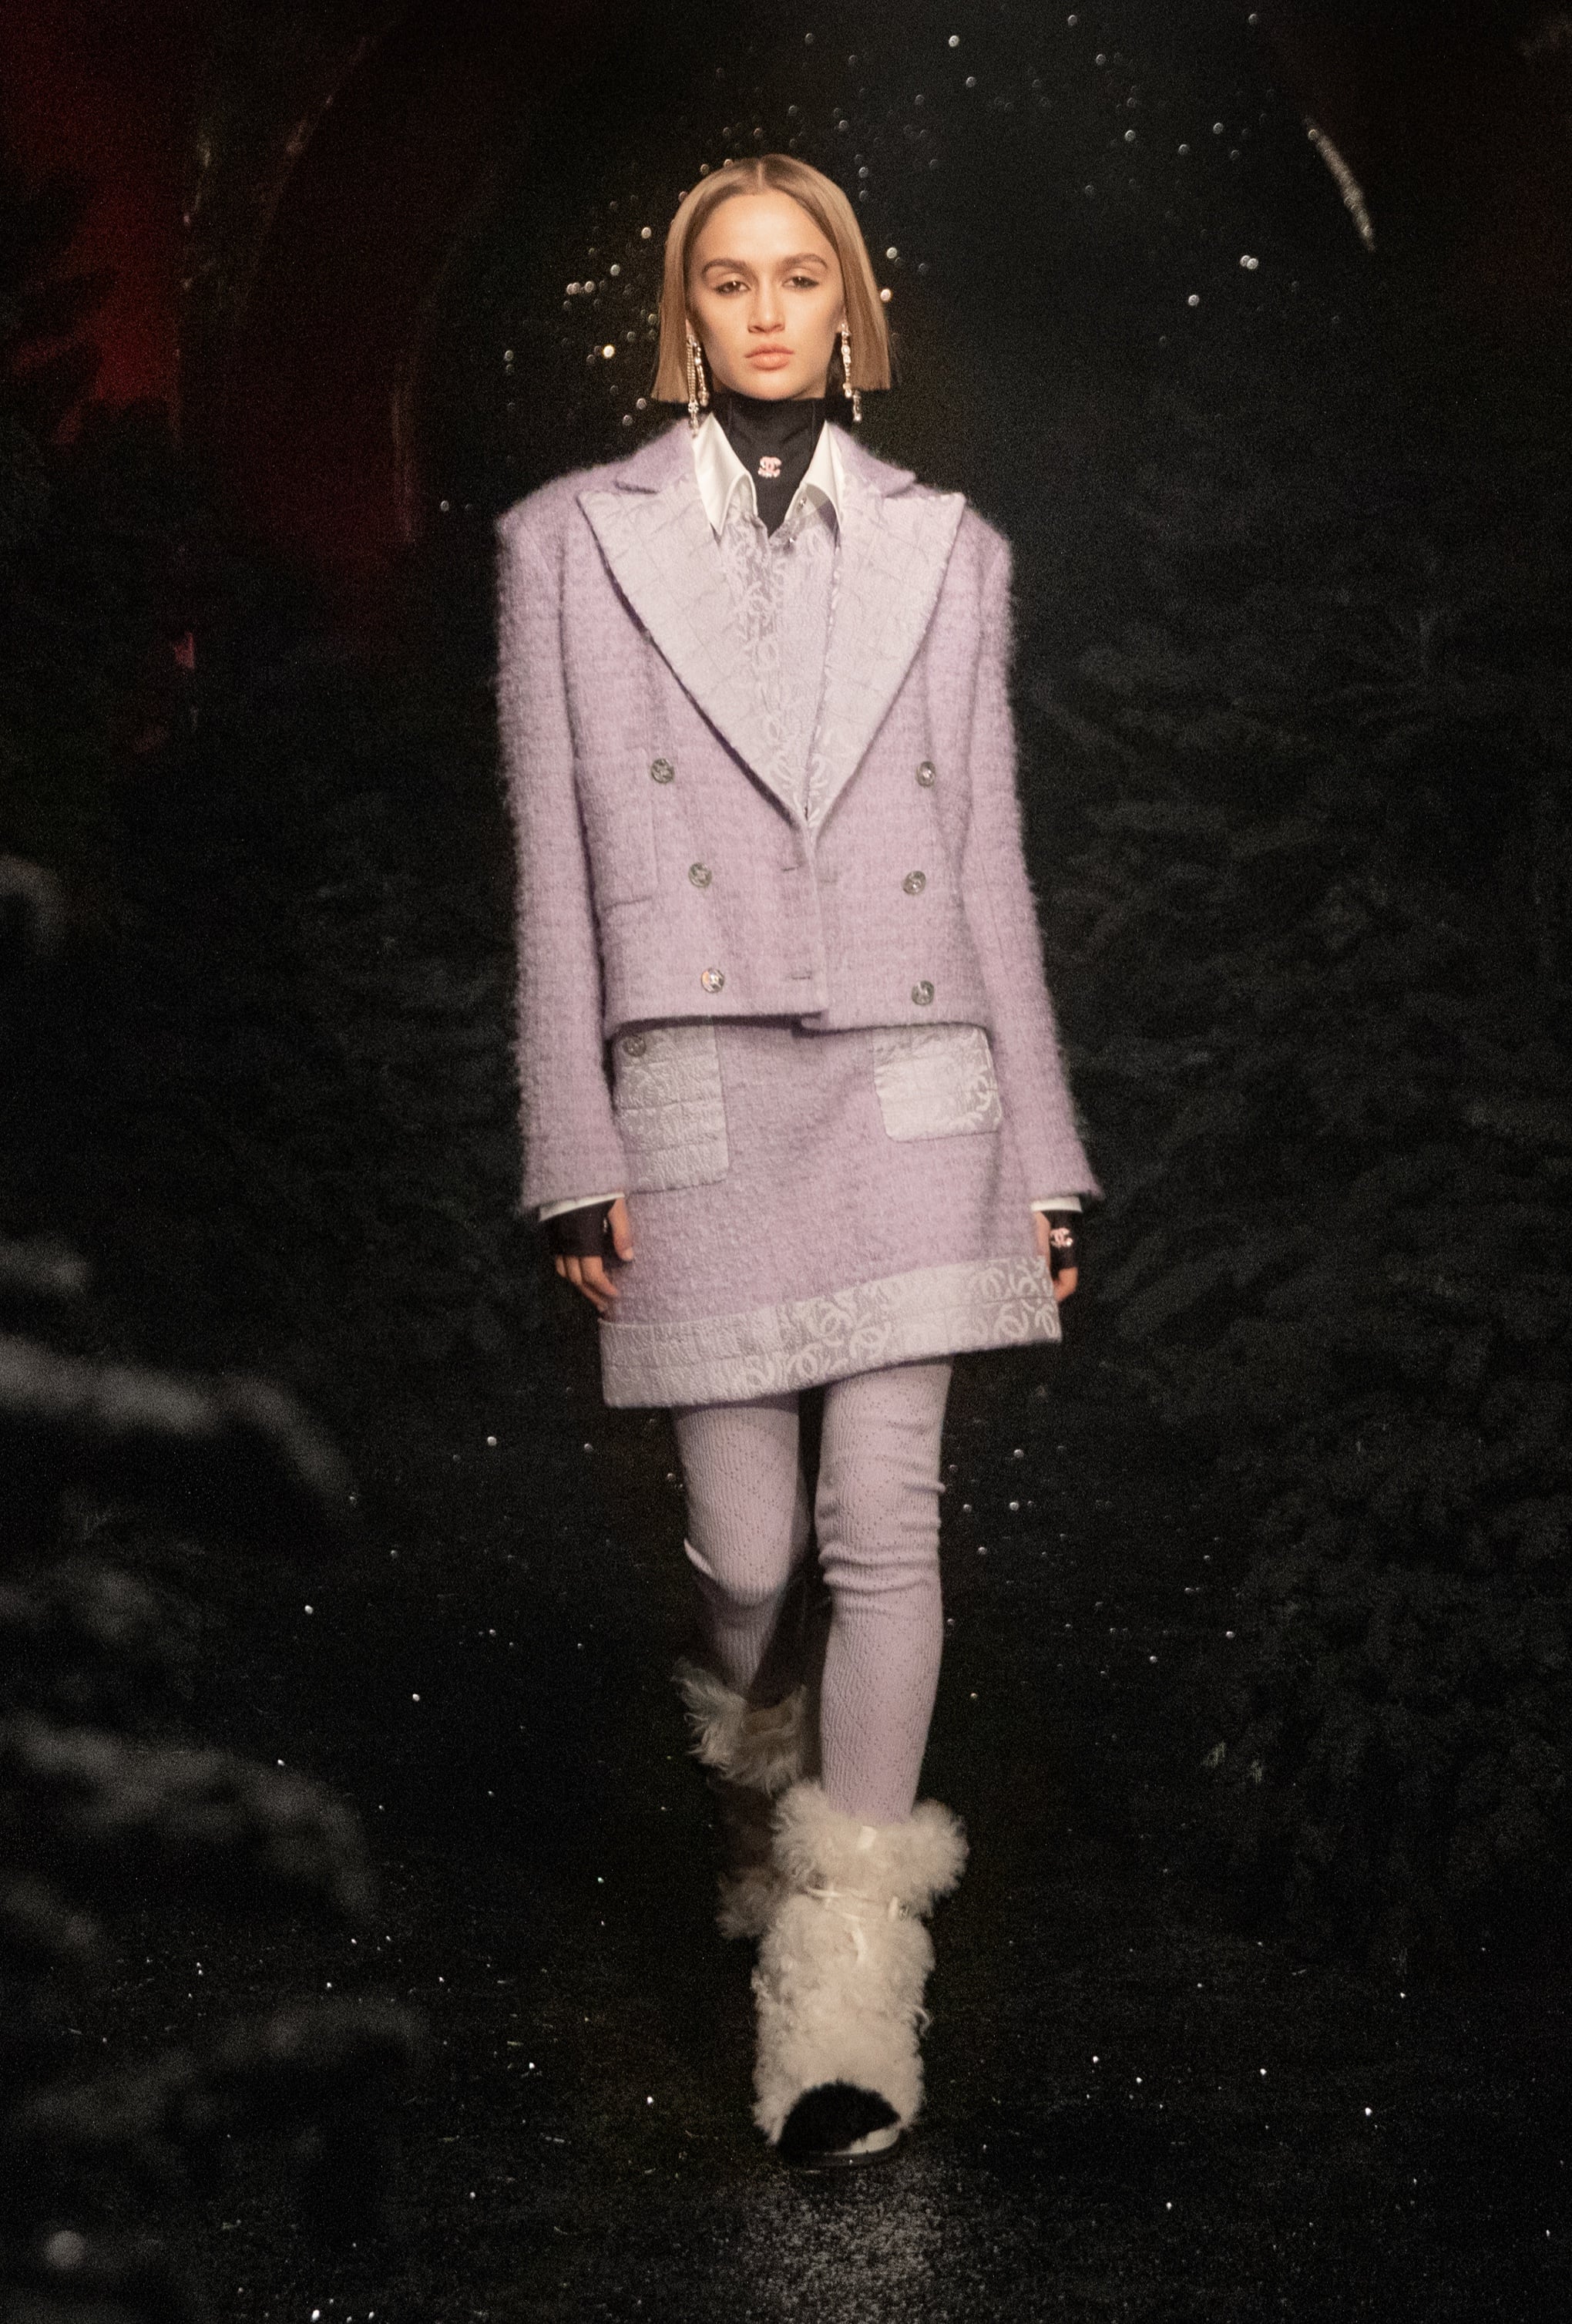 Chanel's Fall Collection Is a Mix of Ski Wear and '70s Cool